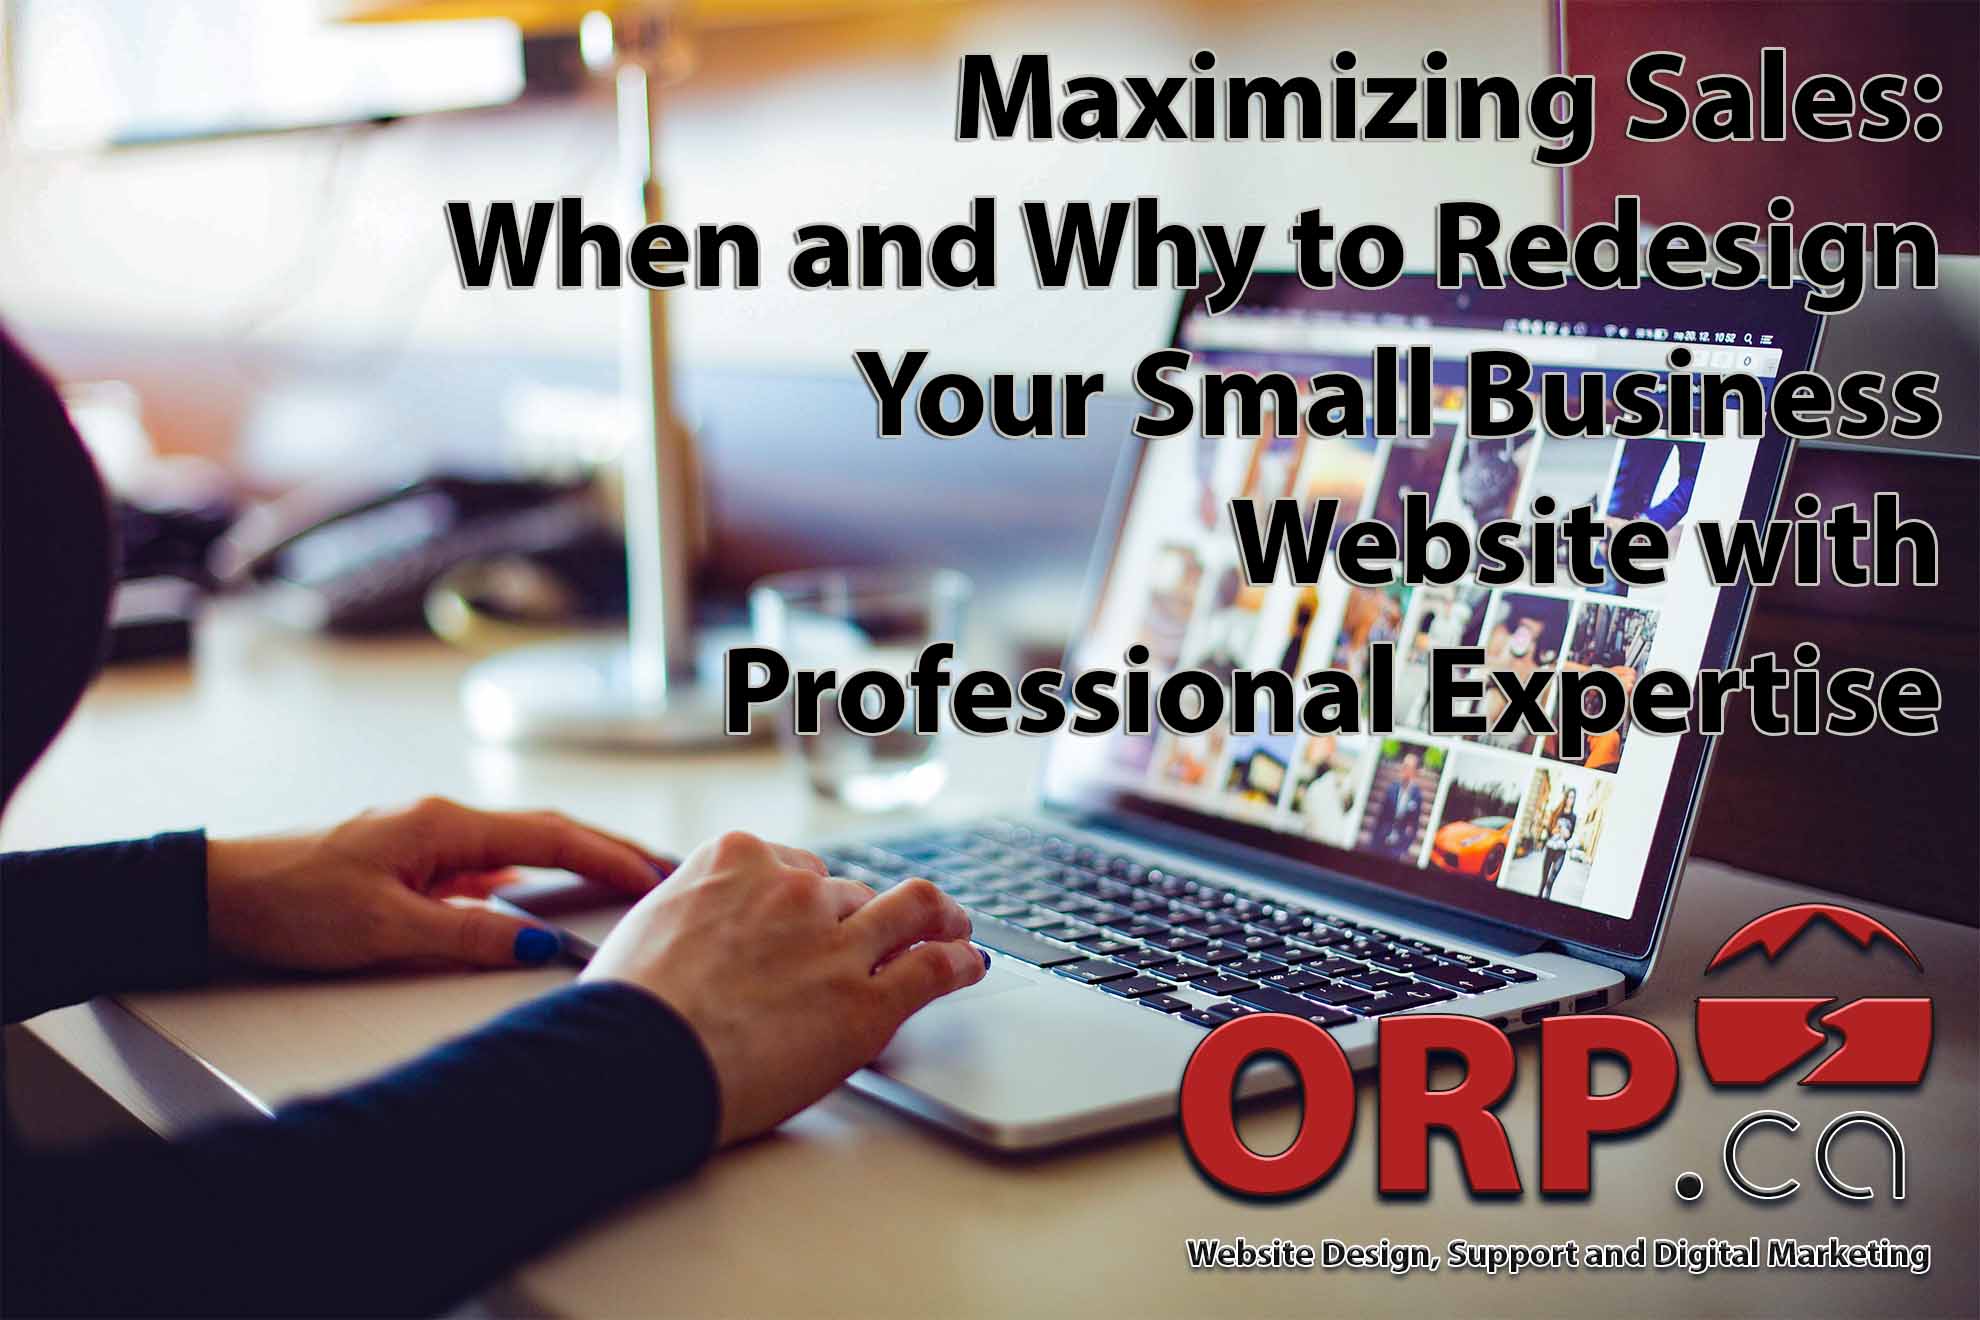 Maximizing Sales When and Why to Redesign Your Small Business Website with Professional Expertise a small business website design and social media marketing article from ORP.ca. Working with small businesses, rural communities and NGOs since 2003.